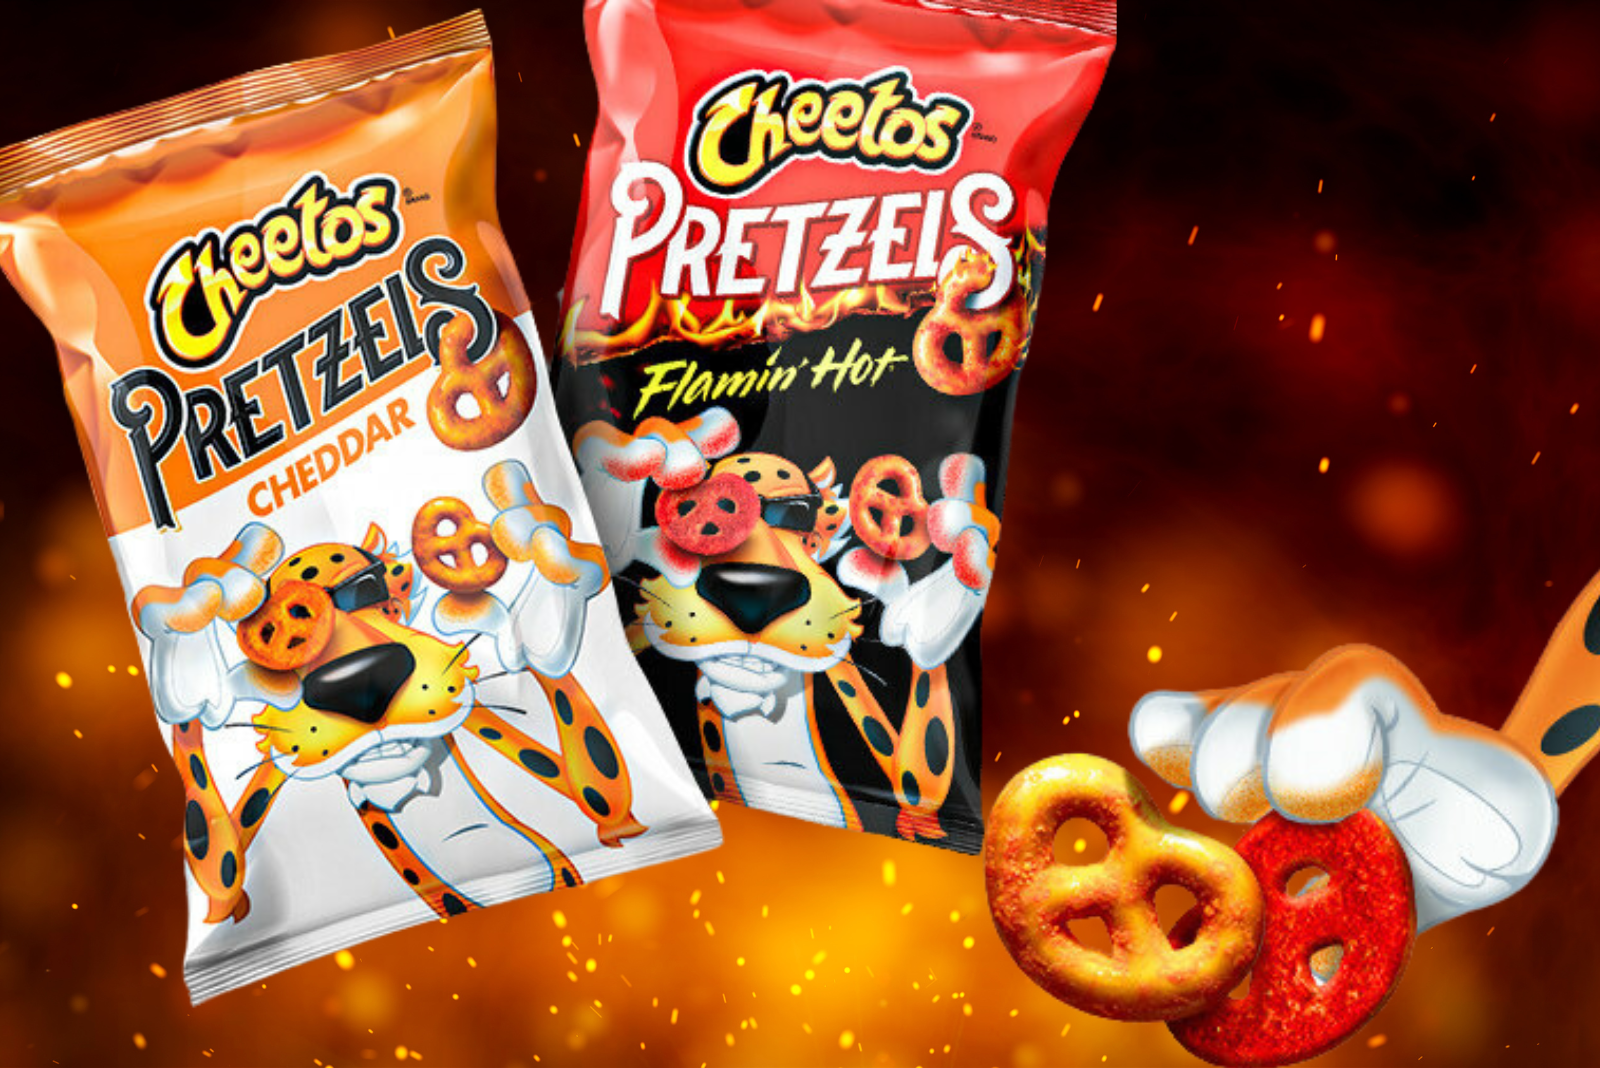 Where can you buy Cheeto's new Cheddar and Flamin' Hot pretzels? - Deseret  News